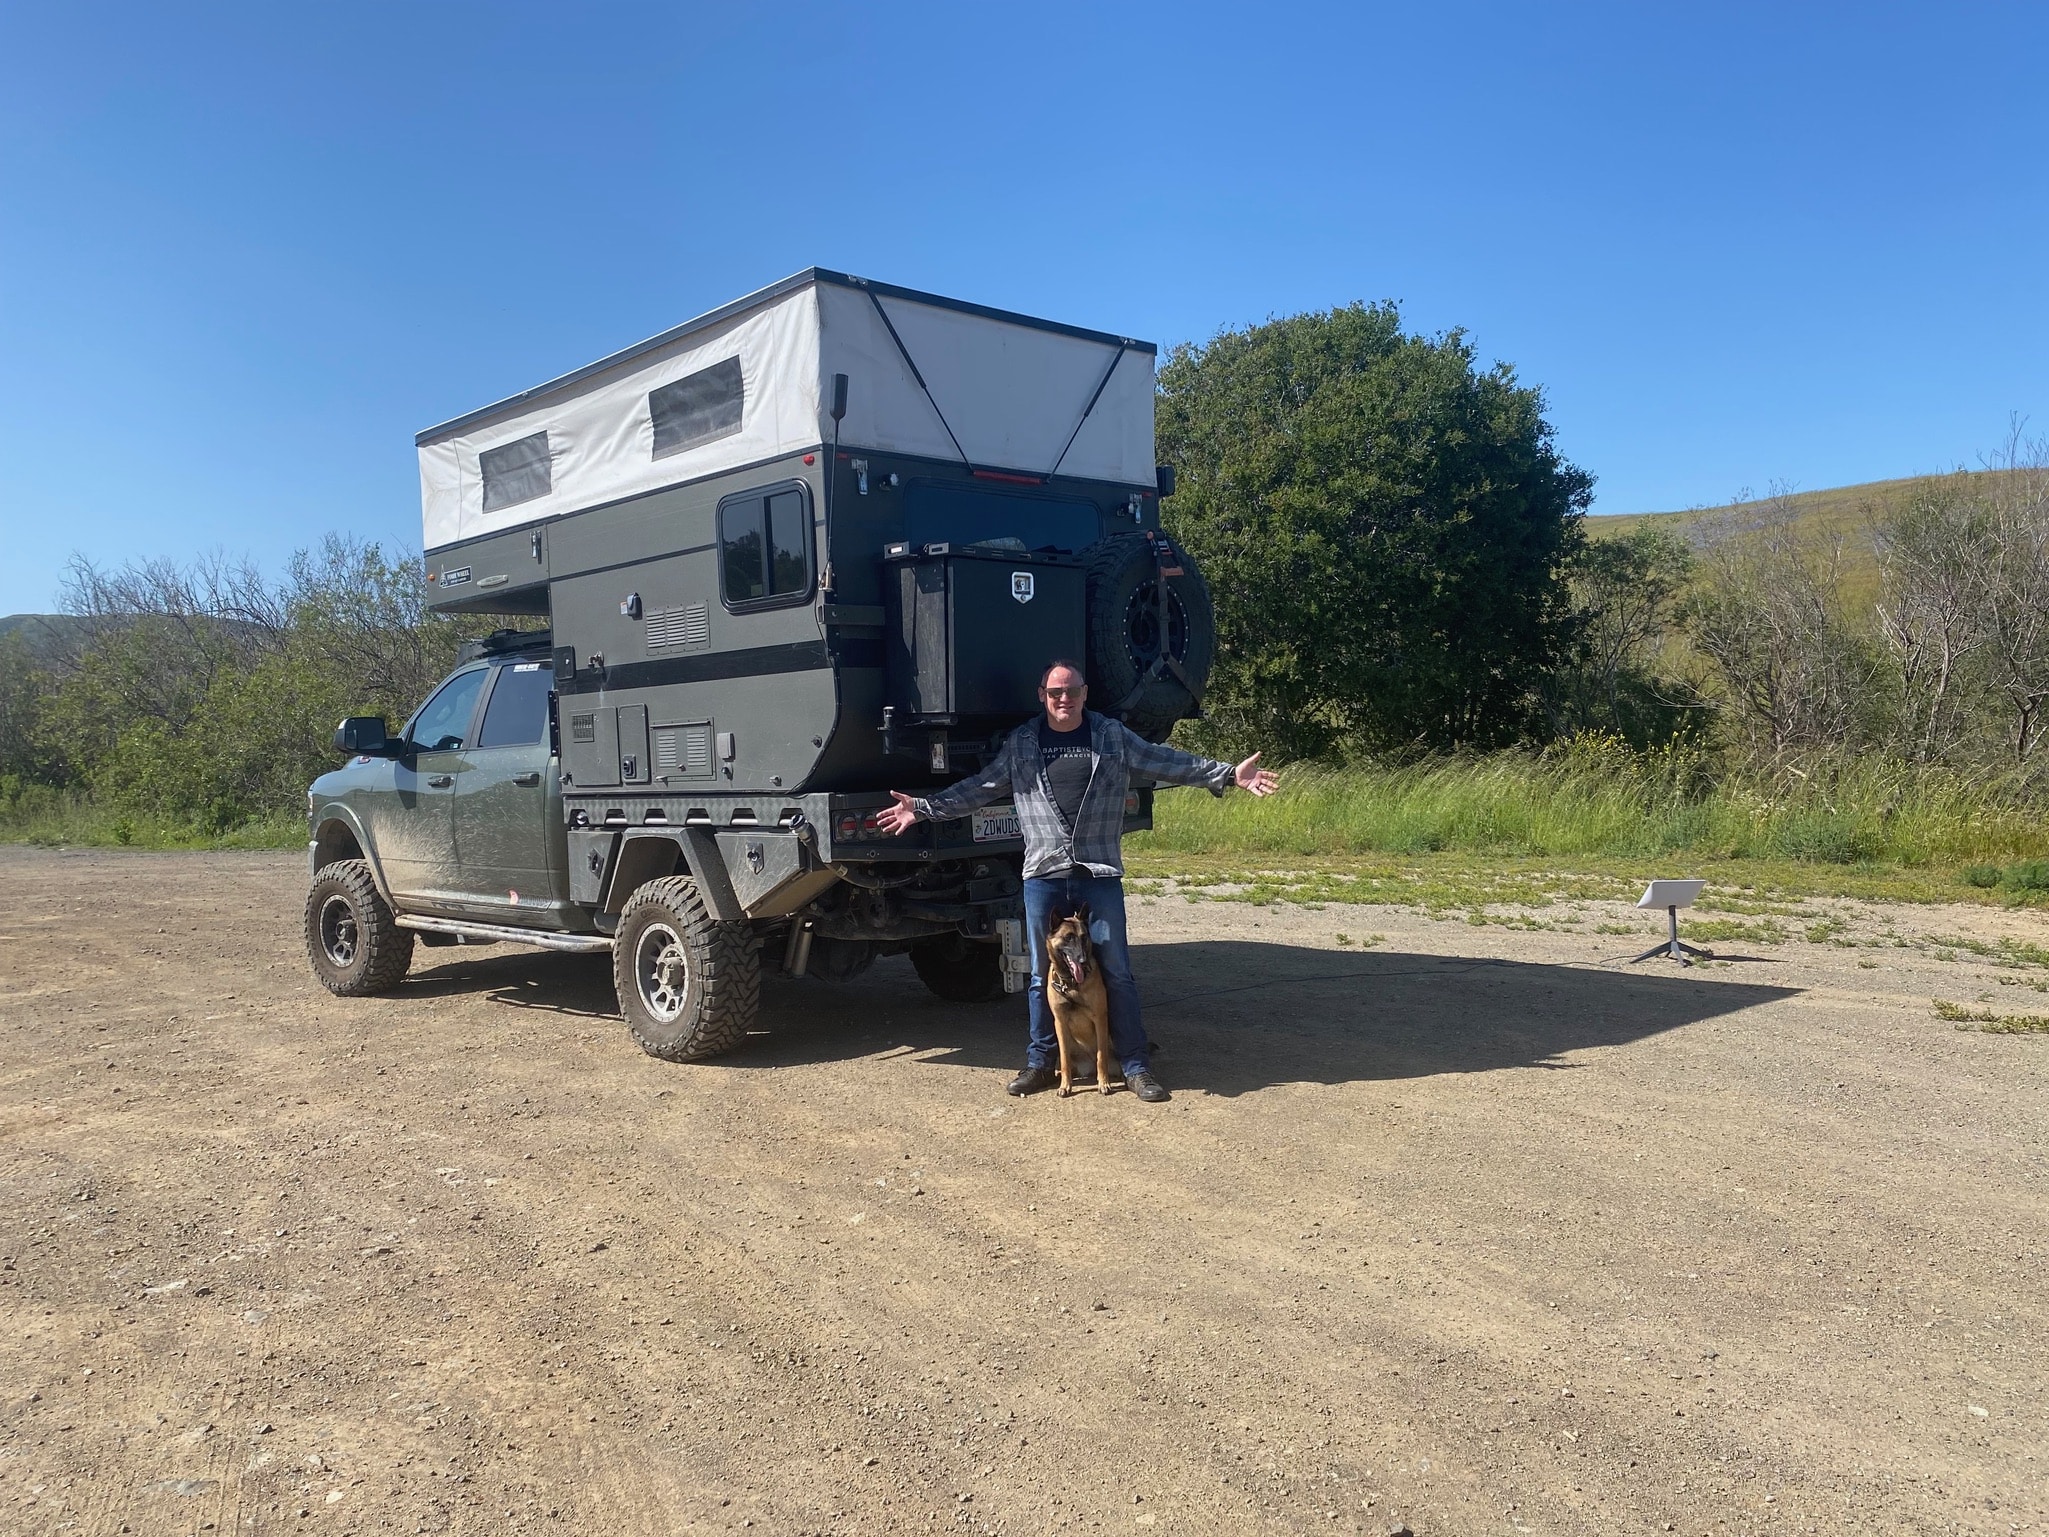 Sean Silvera with his dog posing with his arms open in front of his overlanding rig